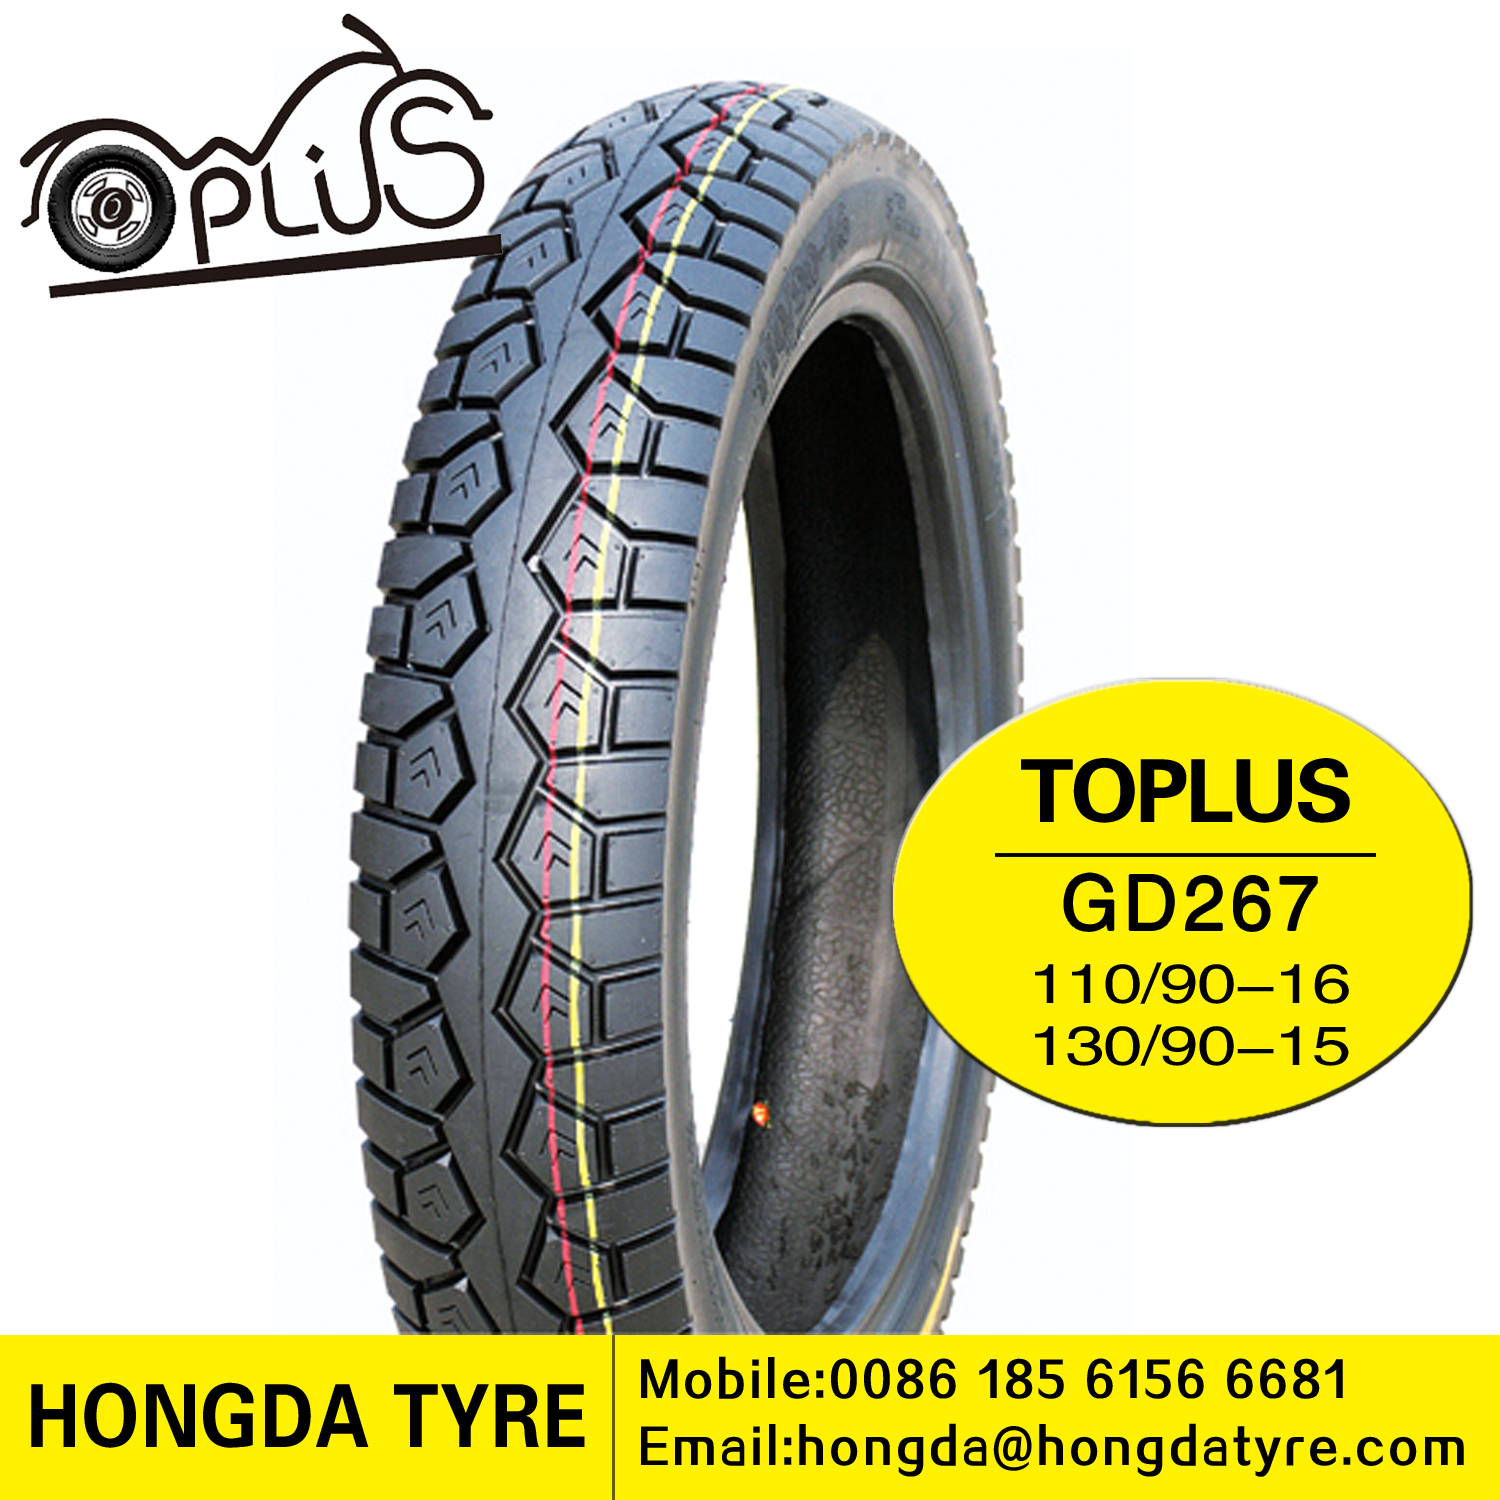 Motorcycle tyre GD267